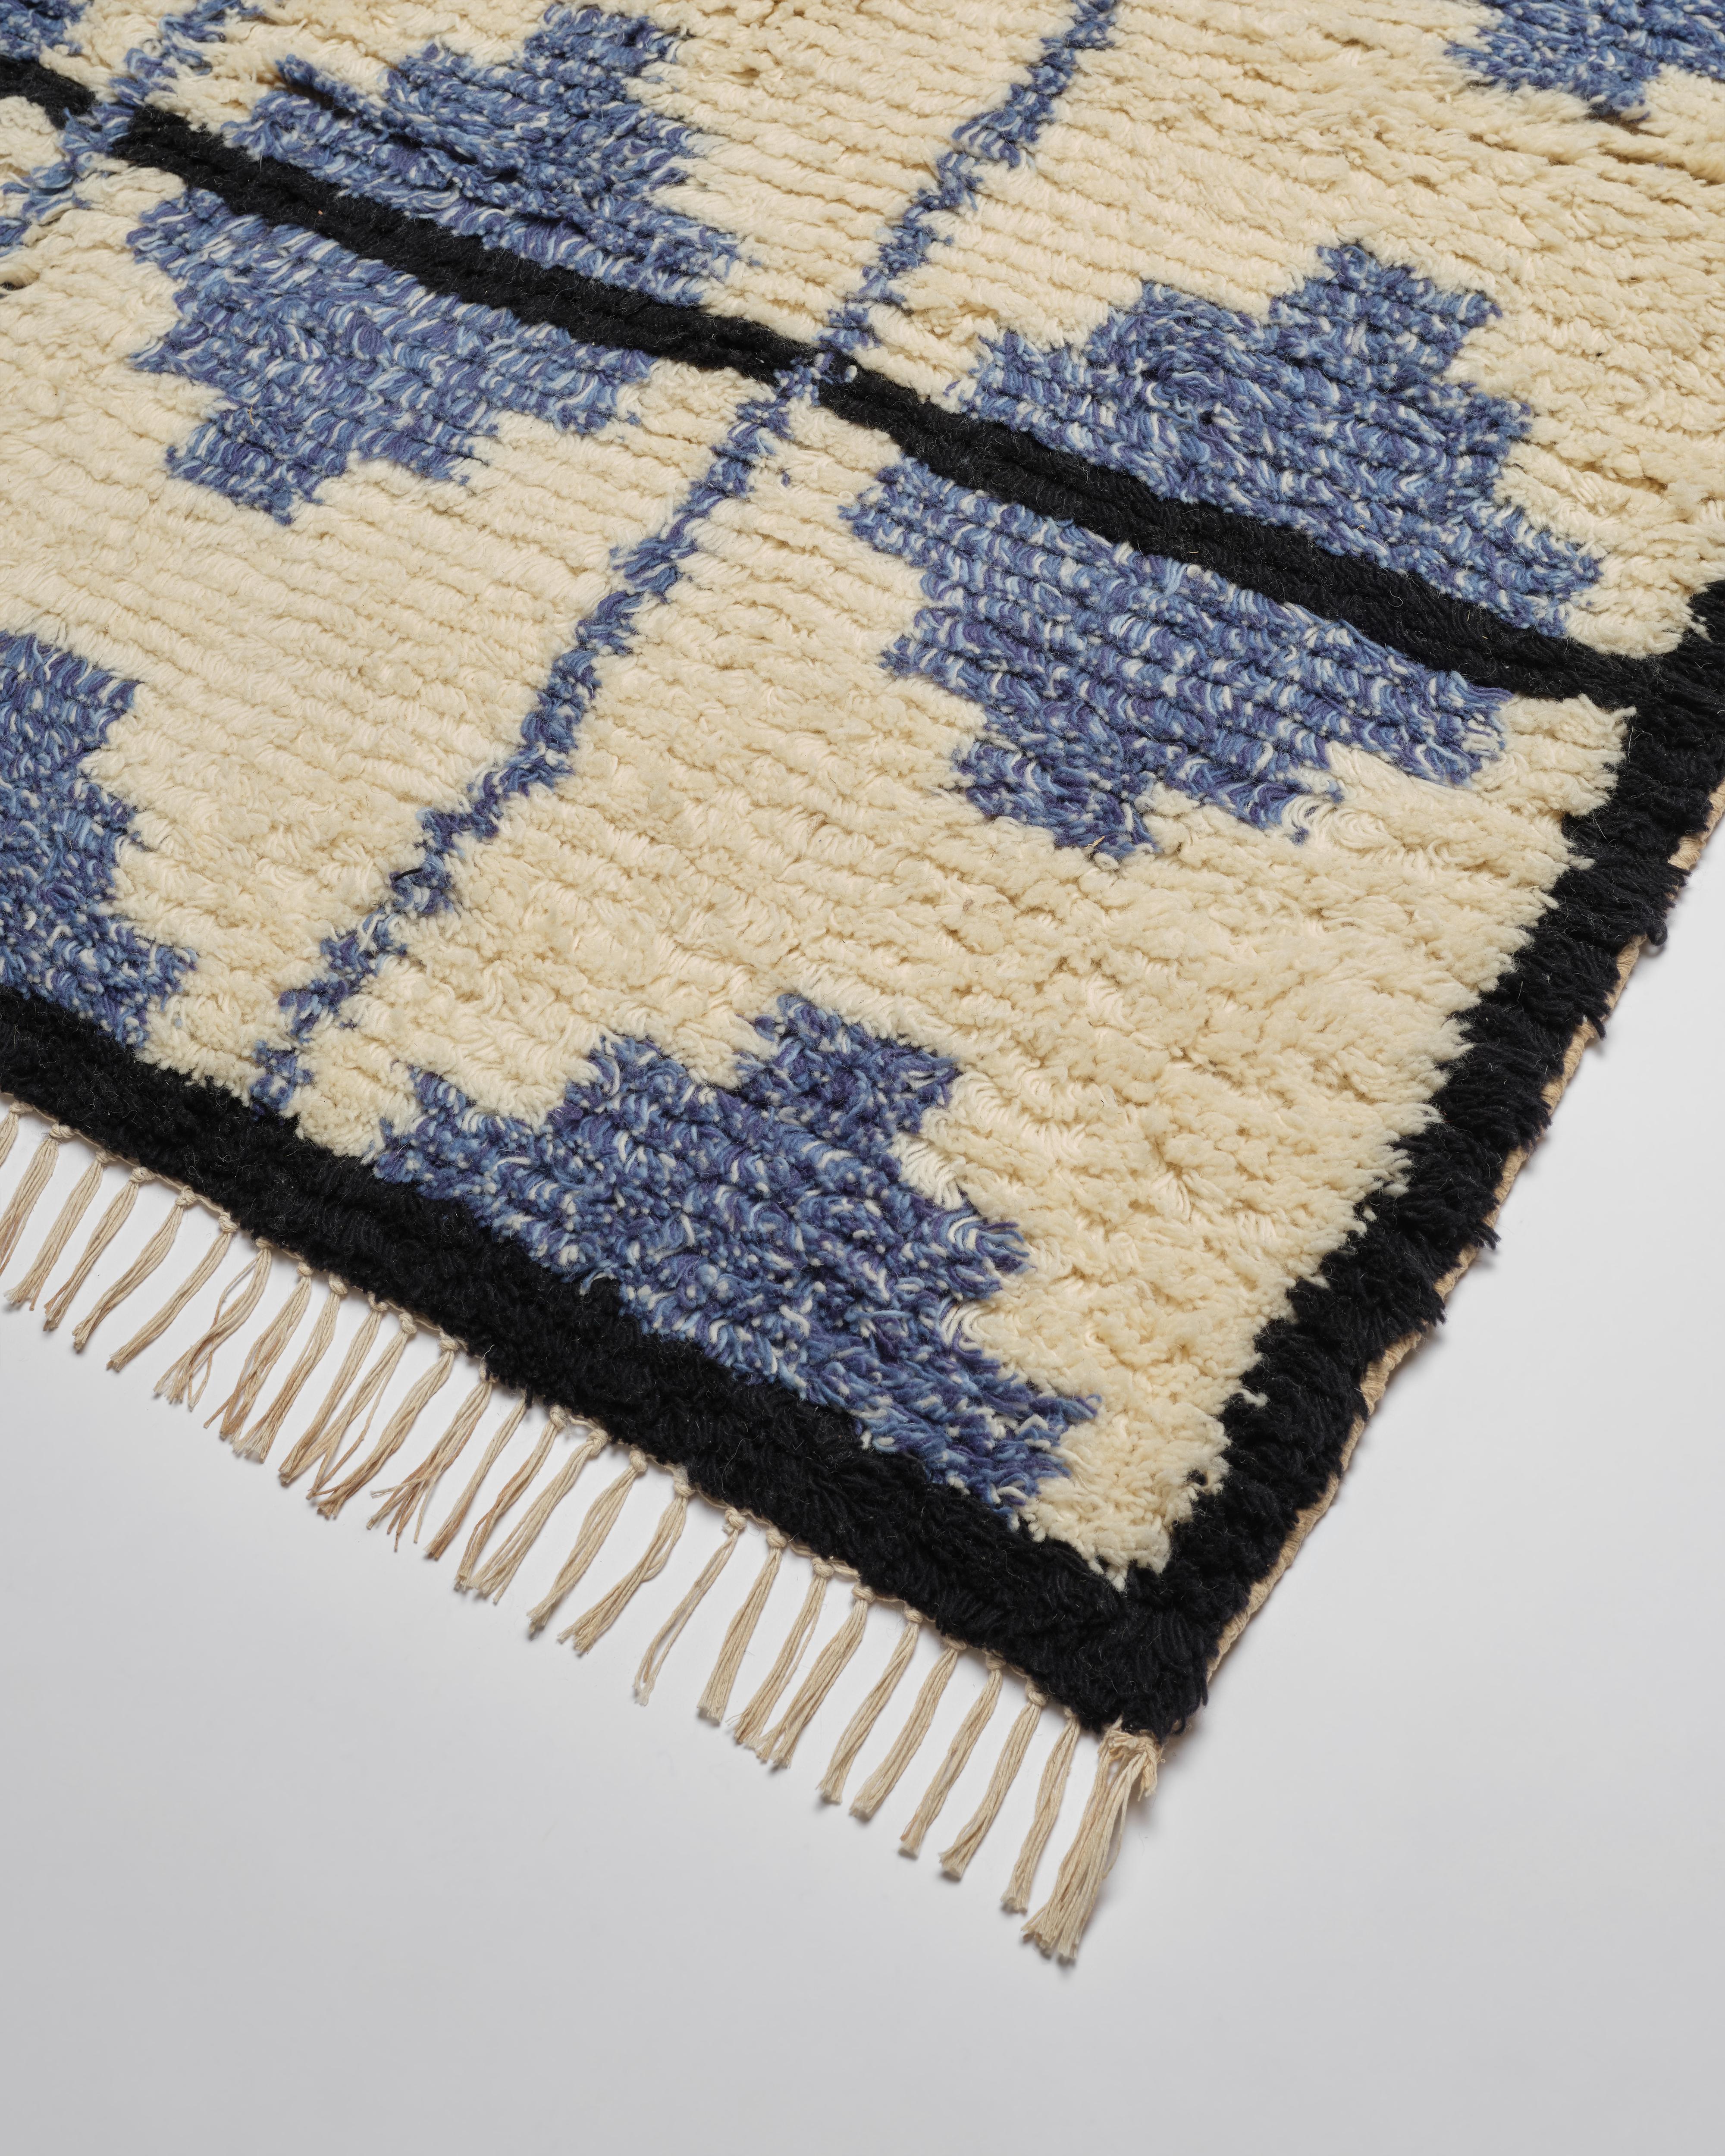 Our beautiful wool and cotton Moroccan style rugs are expertly hand knotted in Jaipur, India. The tiled pattern of cream, blue, and black is chic and sophisticated with a hint of bohemian cool. Available in sizes 6x9', 8x10' and 9x12'